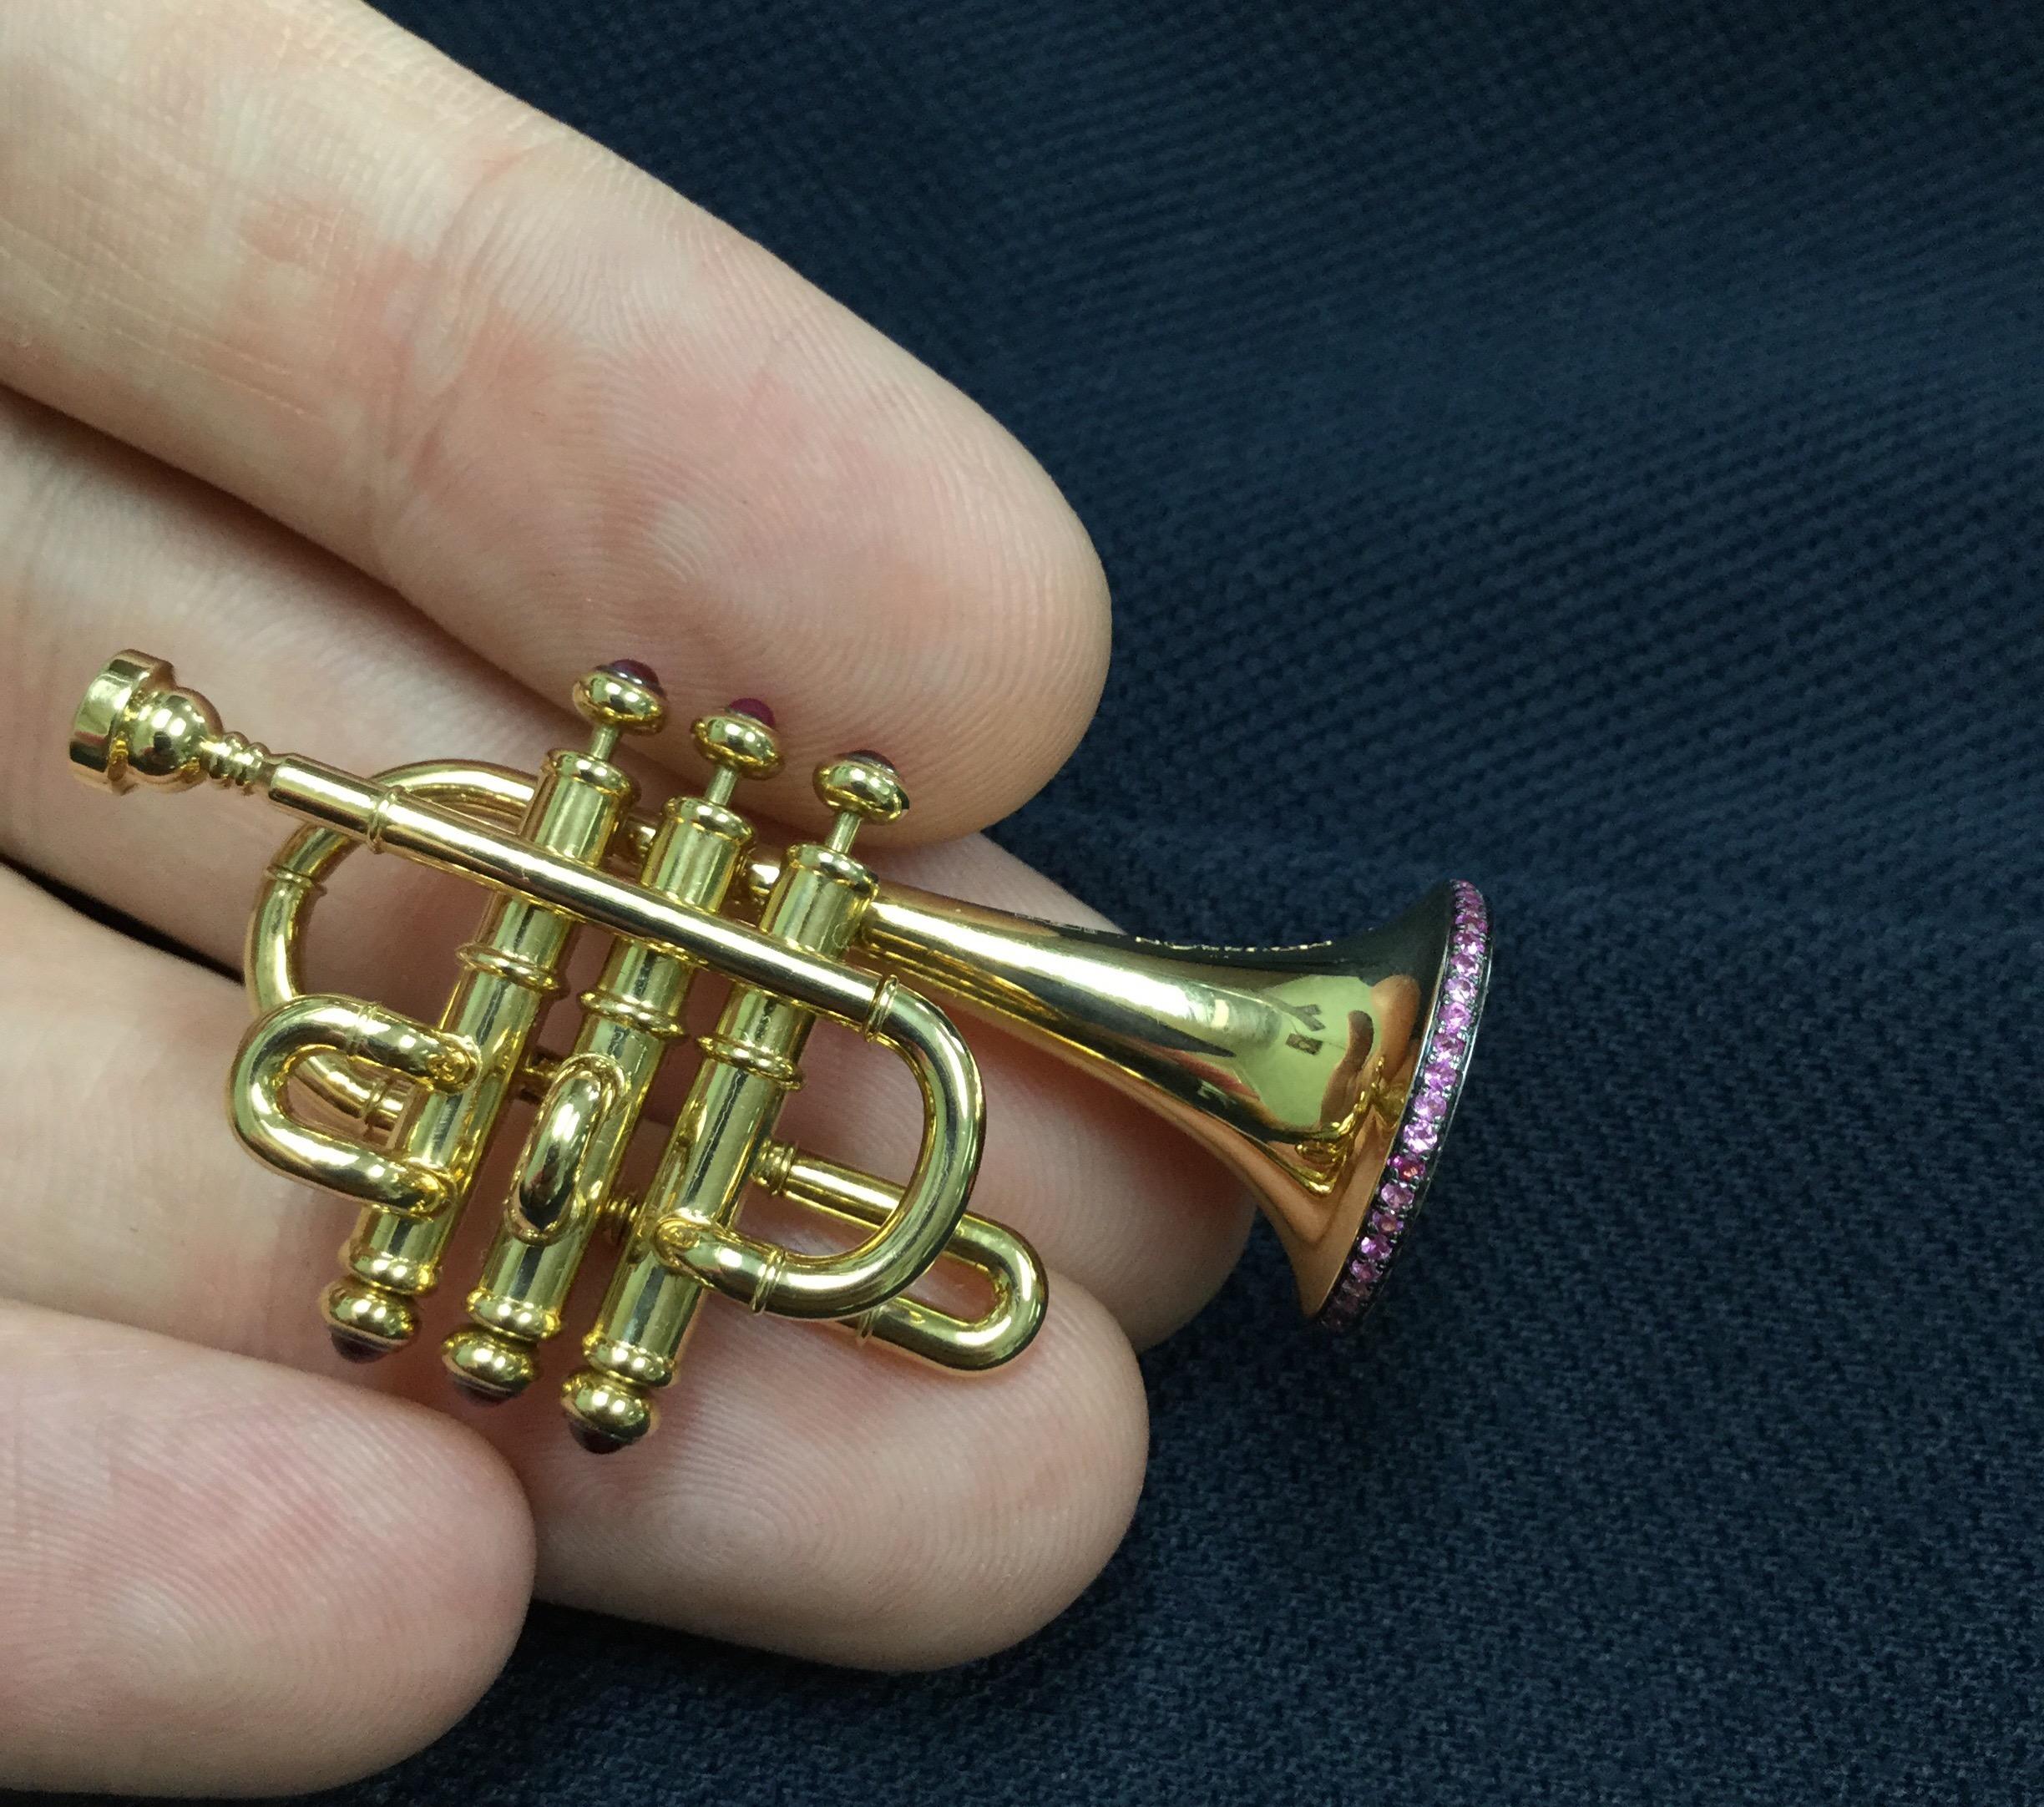 Mousson Atelier represent with prouds!
18 Karat Gold Brooch from our Musical Instruments Collection, Ruby and Pink Sapphires. The buttons are movable. And the music notes fling out, makes this brooch alive.

45mm x 27mm x 18mm
18.13 gms